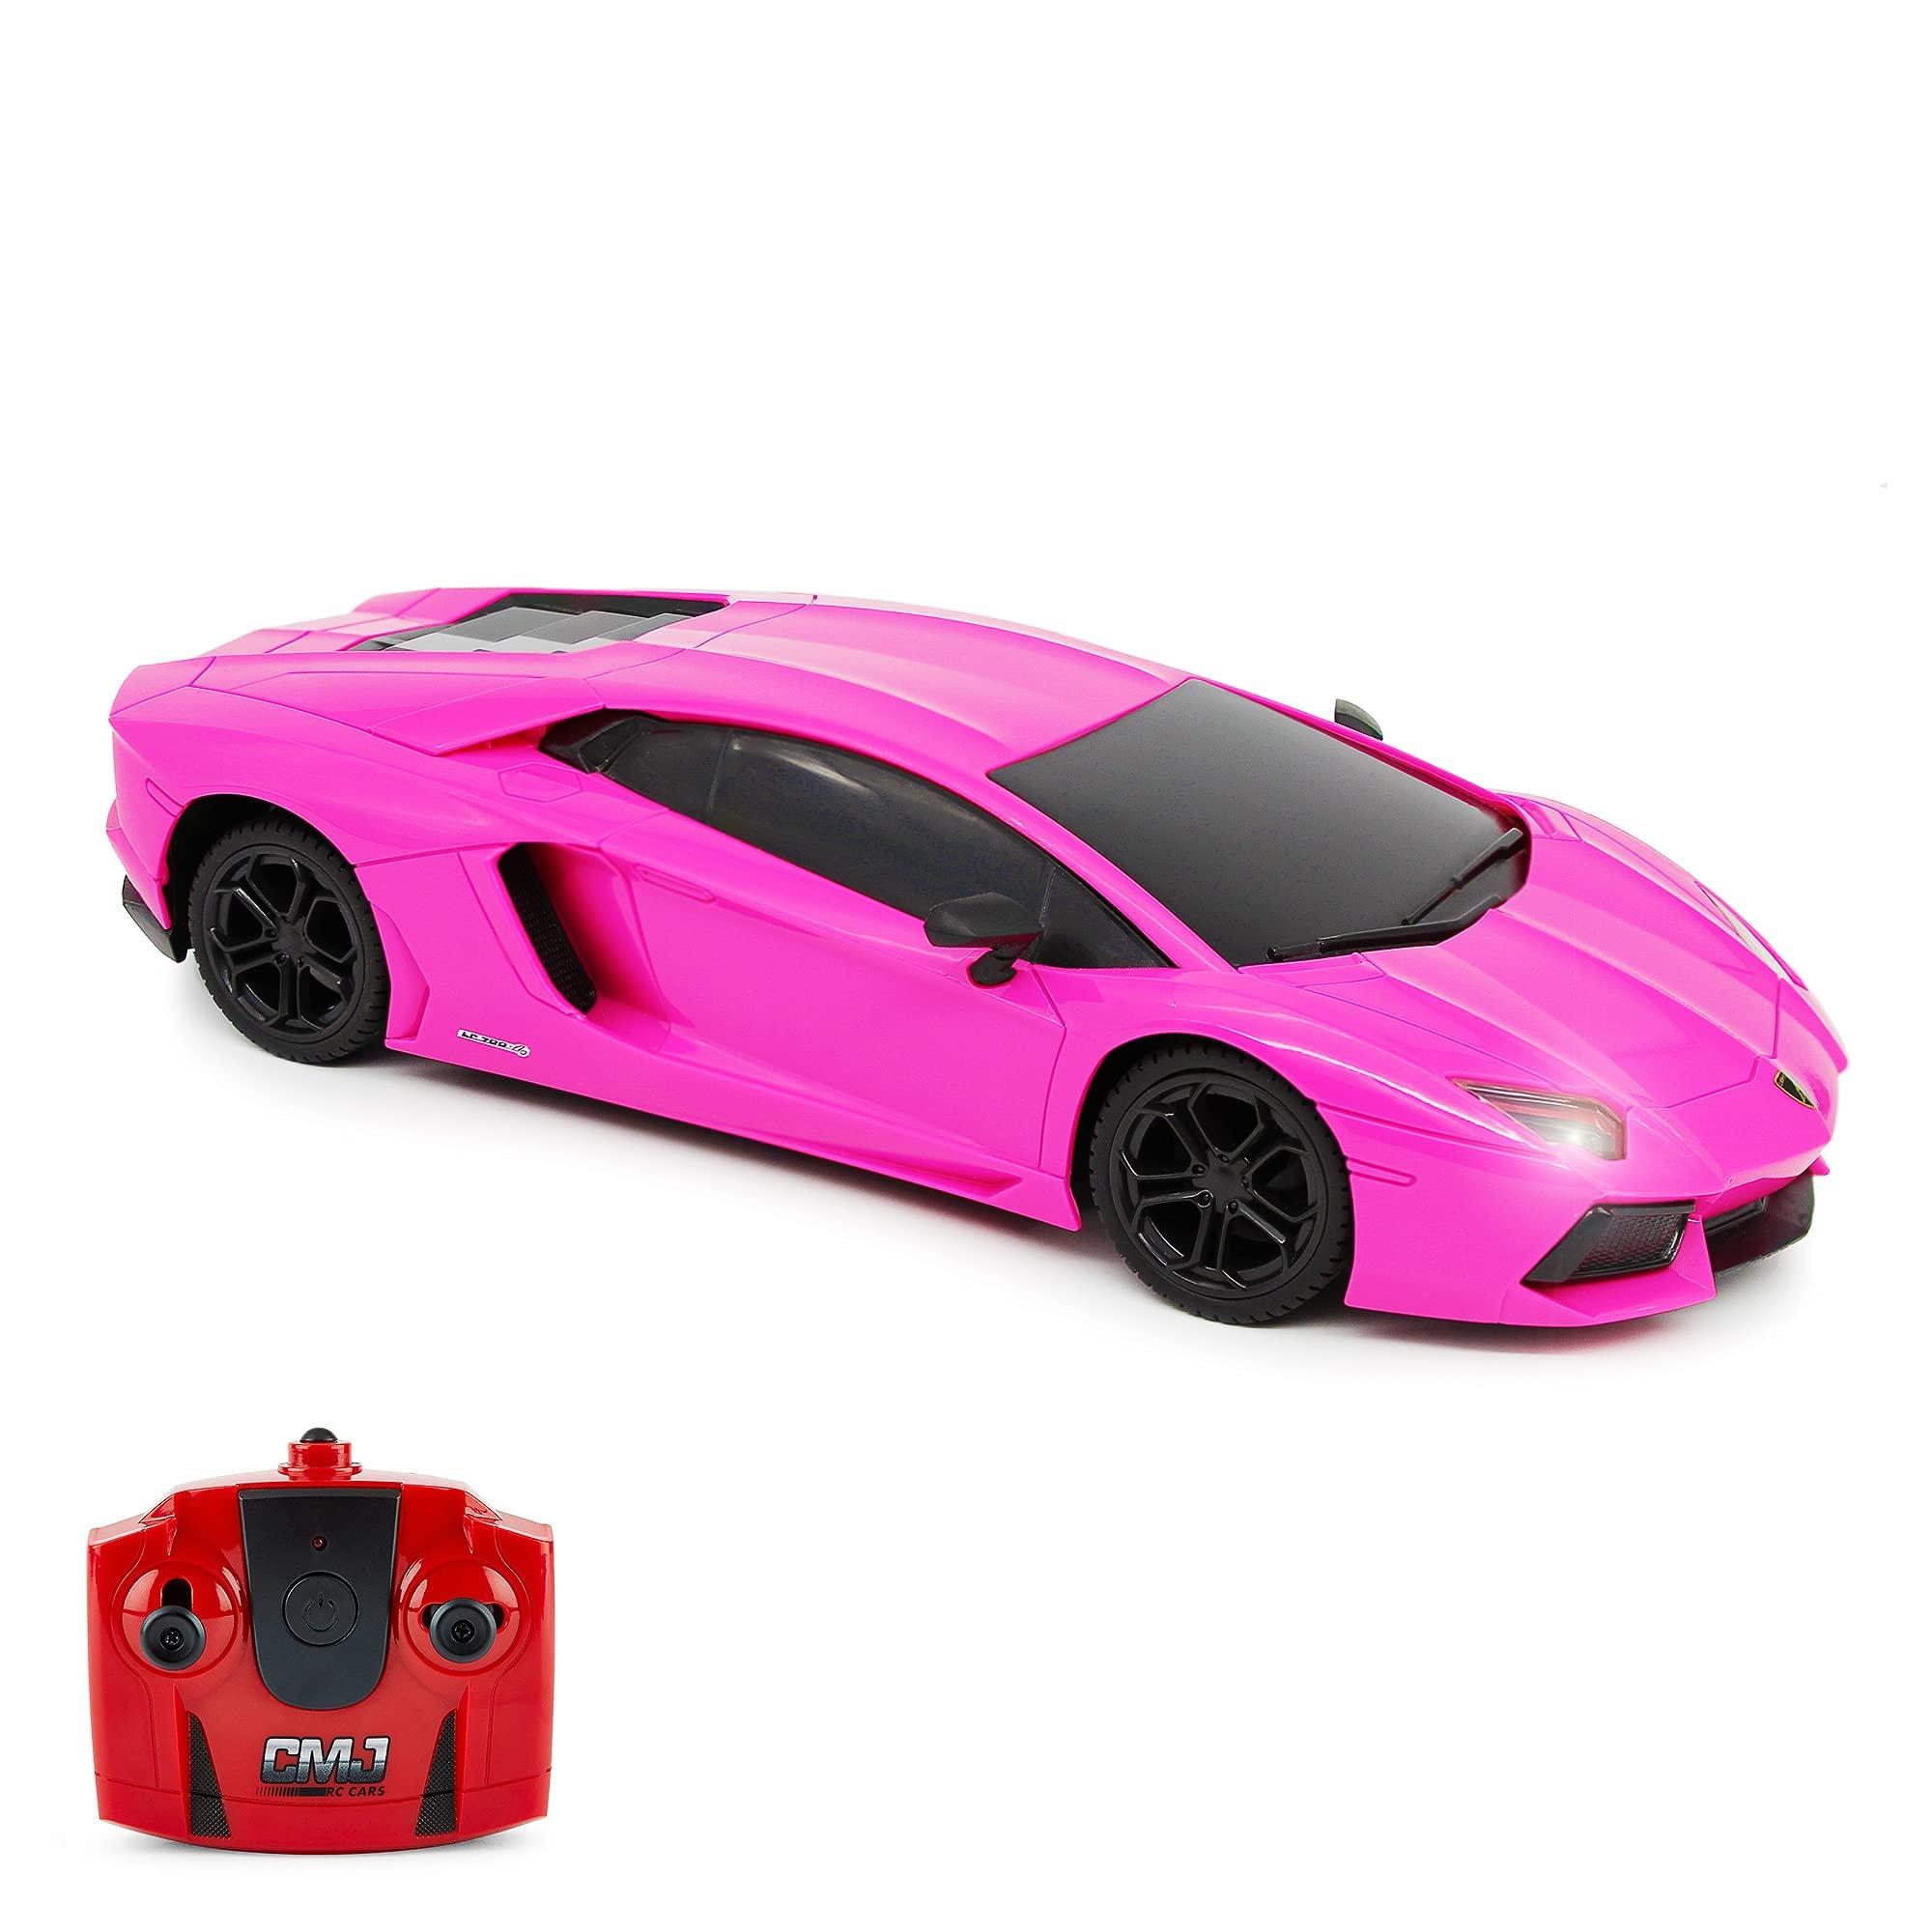 Cmj Rc Cars: CMJ RC Cars: A Wide Range of Options for All Types of Users